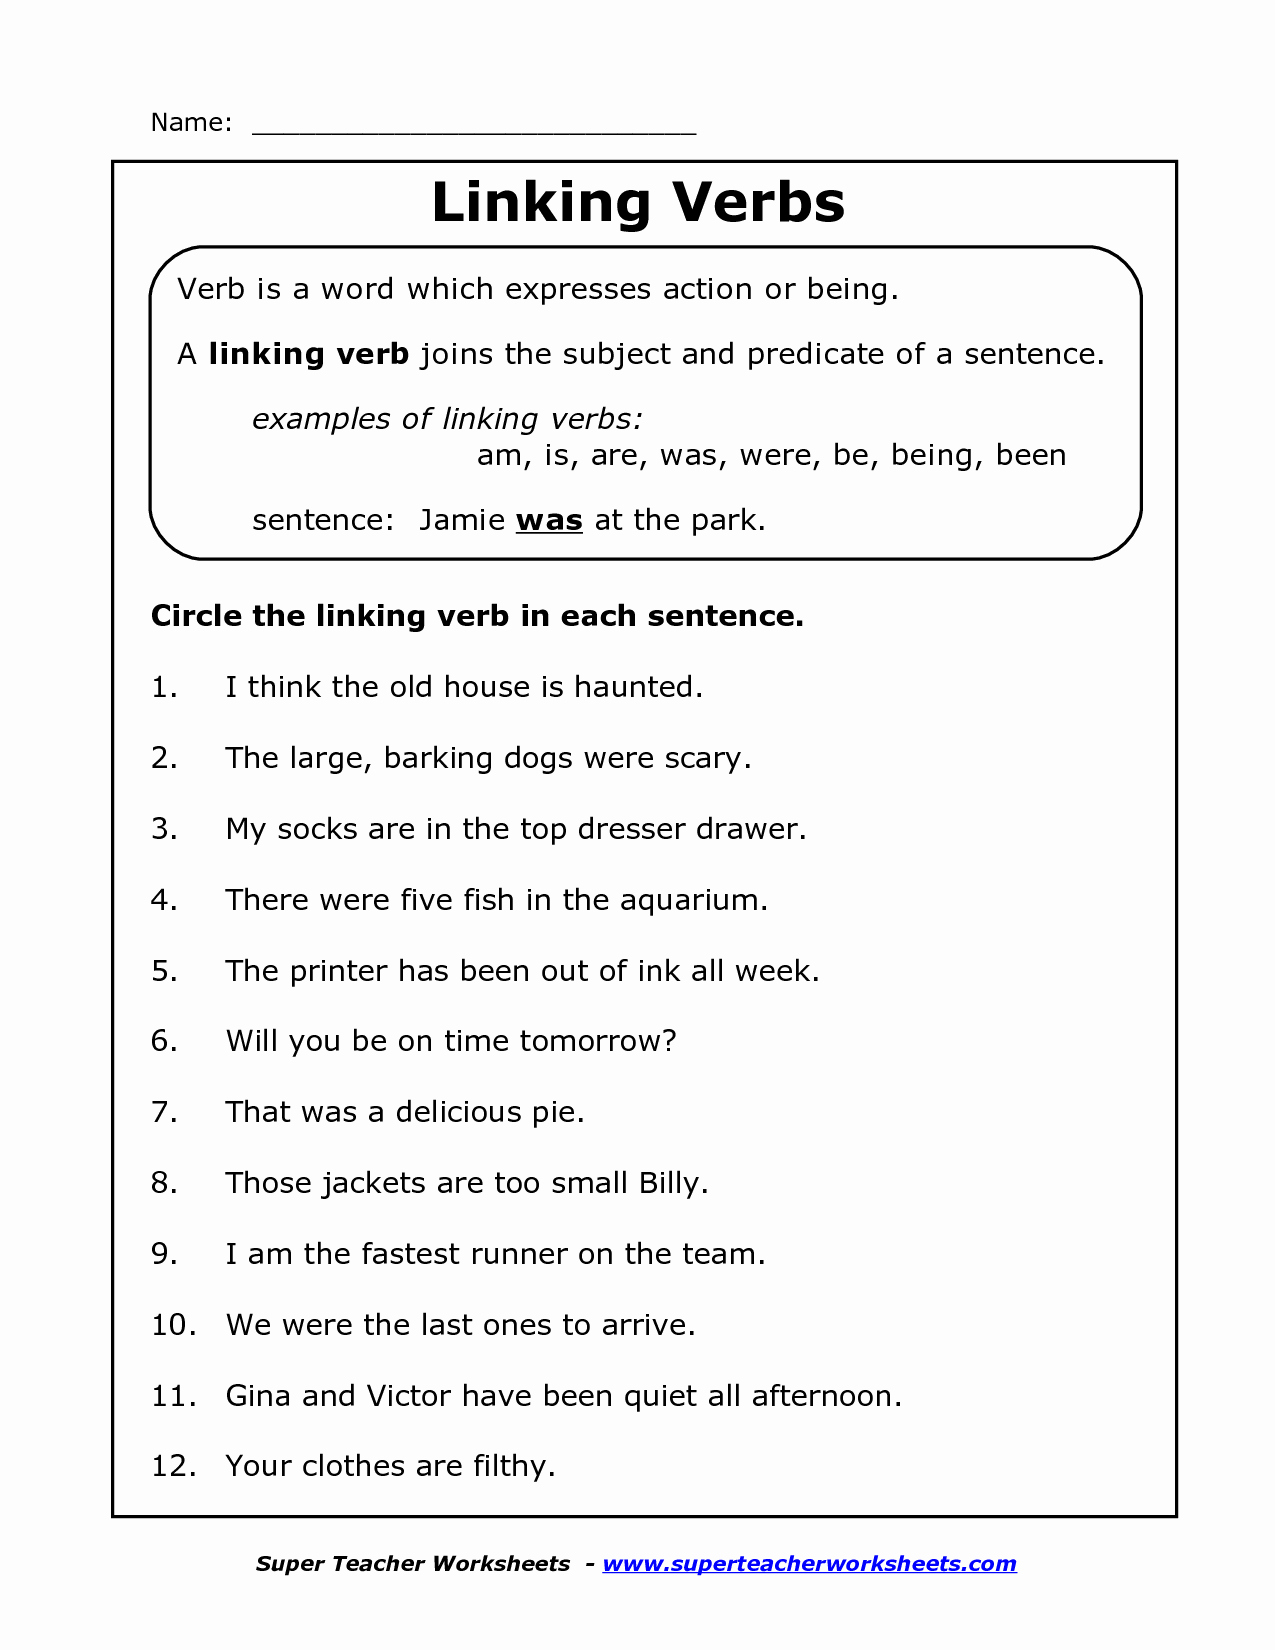 Action and Linking Verbs Worksheet New 17 Best Of Linking Verbs Worksheet Grade 1